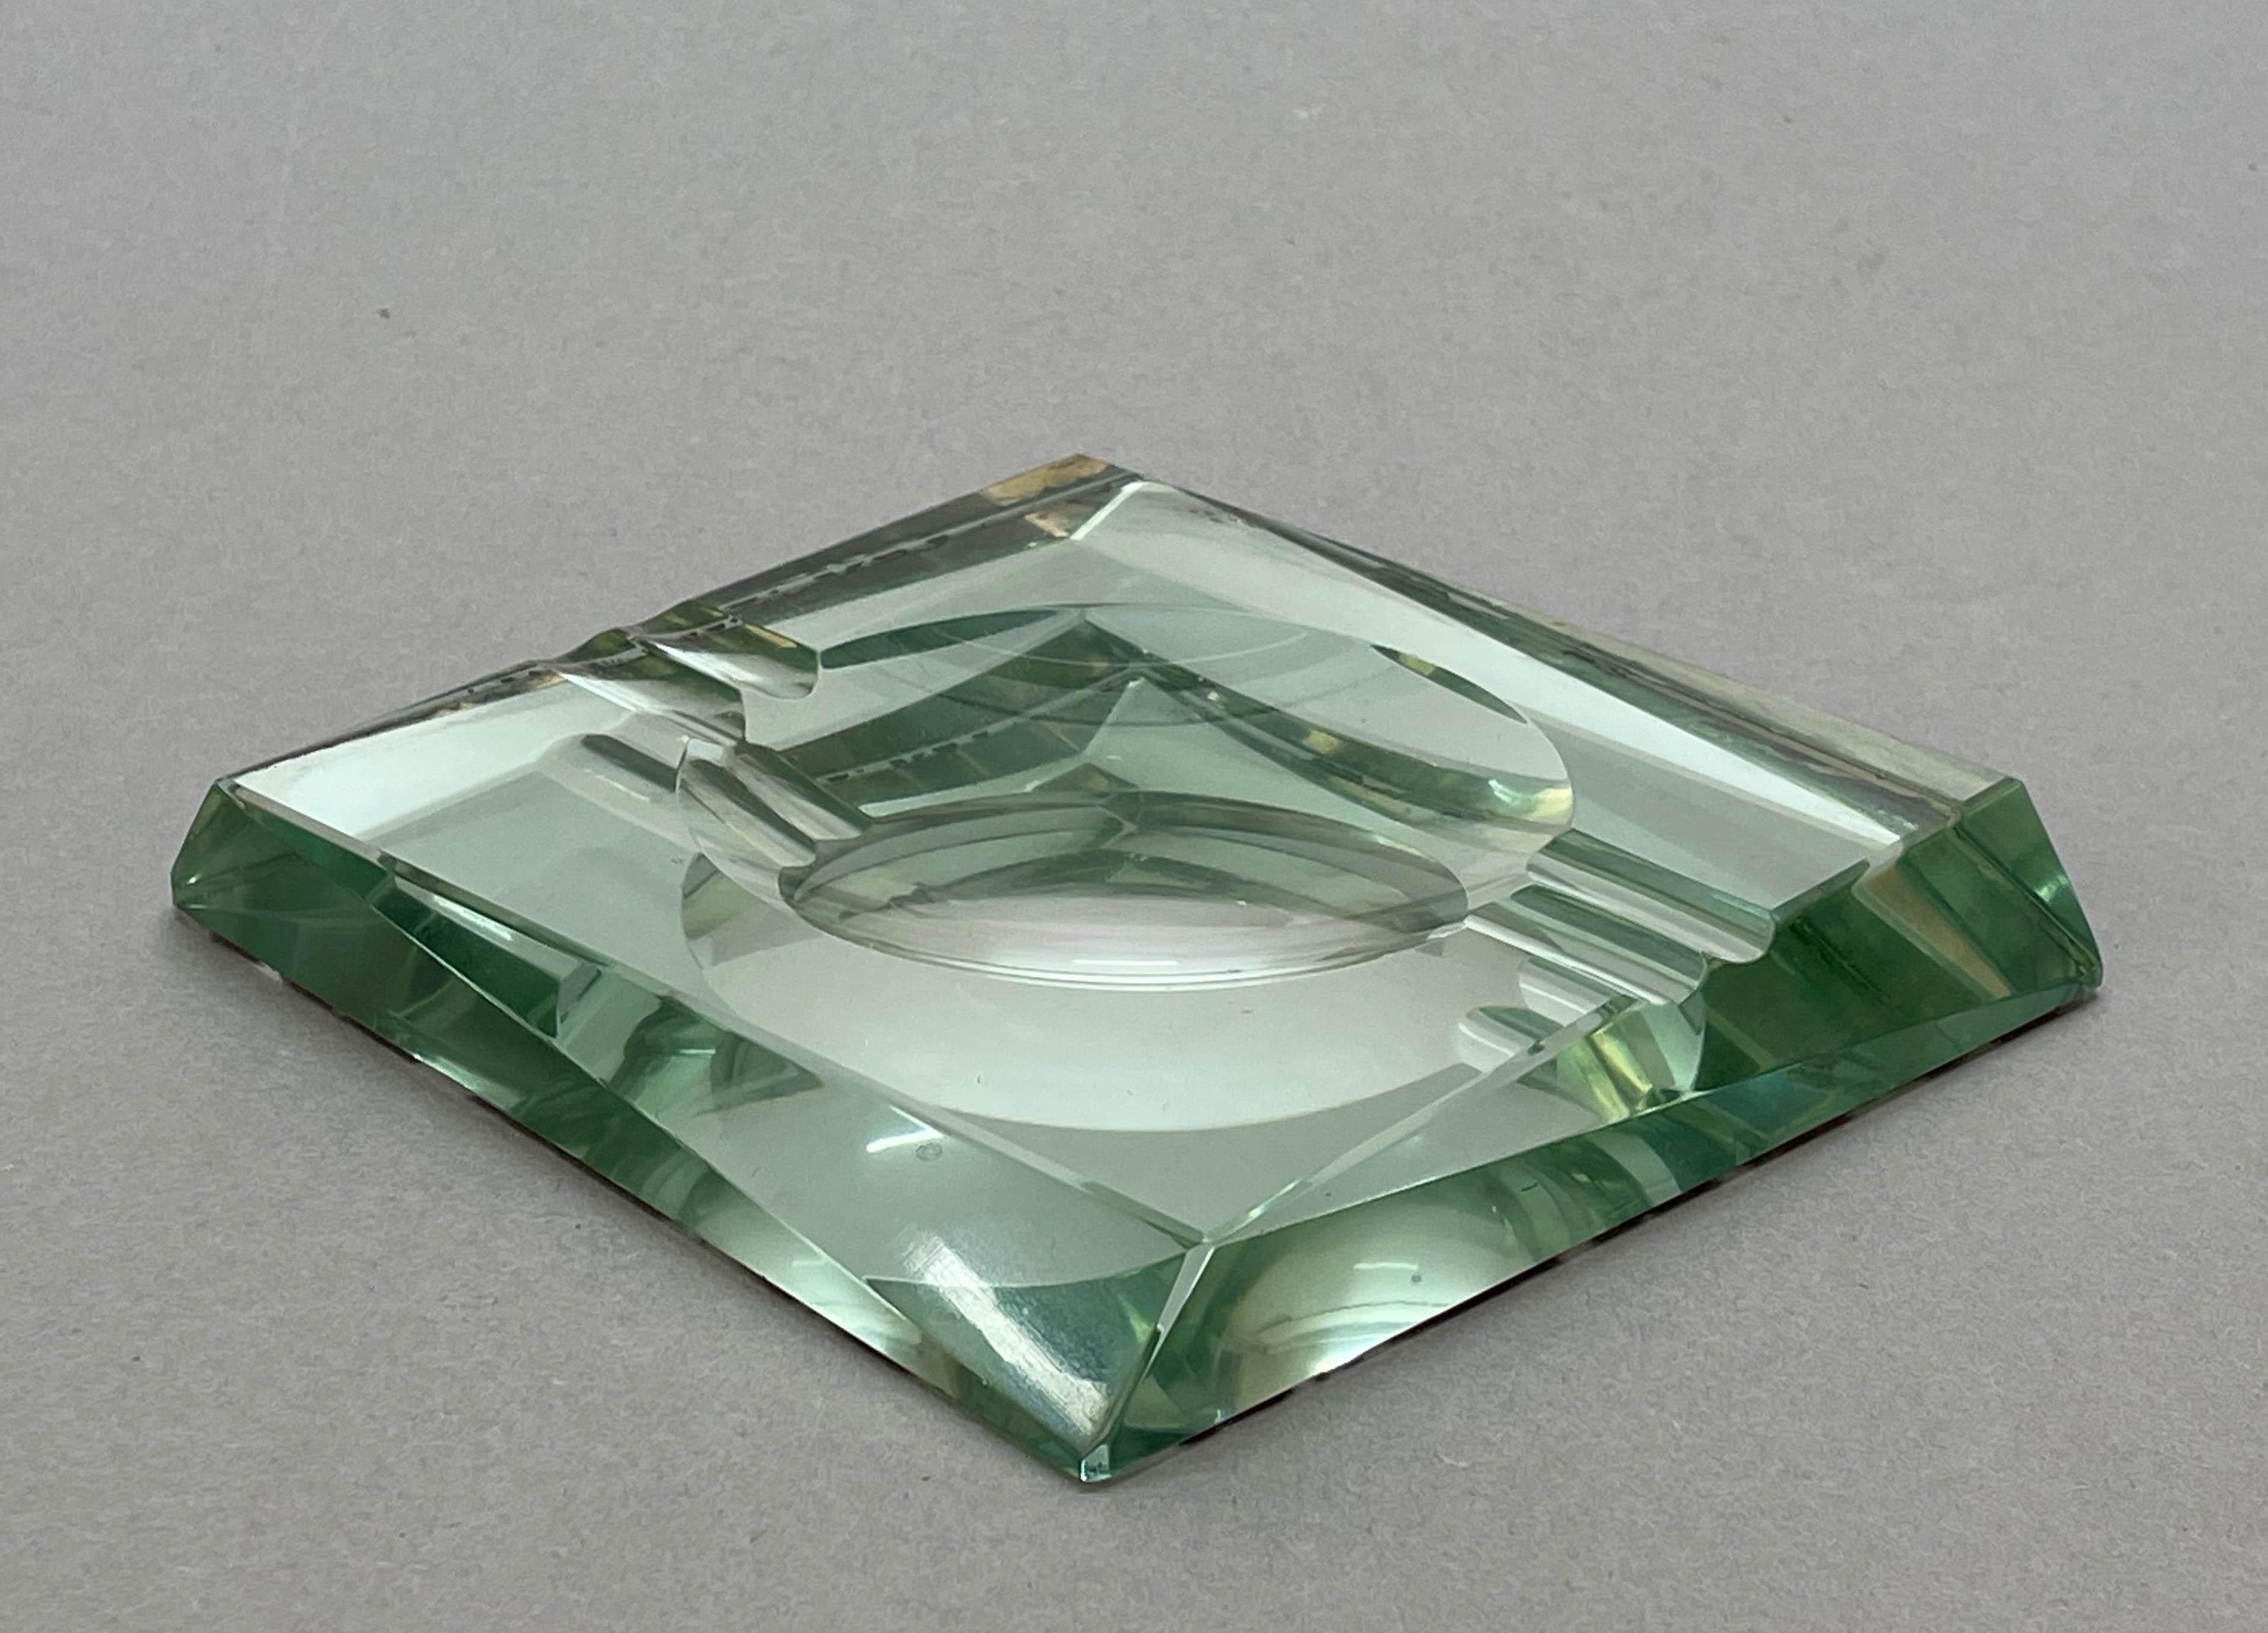 Amazing Mid-Century Modern green glass squared ashtray. This wonderful piece was produced by Fontana Arte in Italy during the 1960s.

The item is in squared green crystal glass with geometrical carving, the classical design by Fontana Arte from